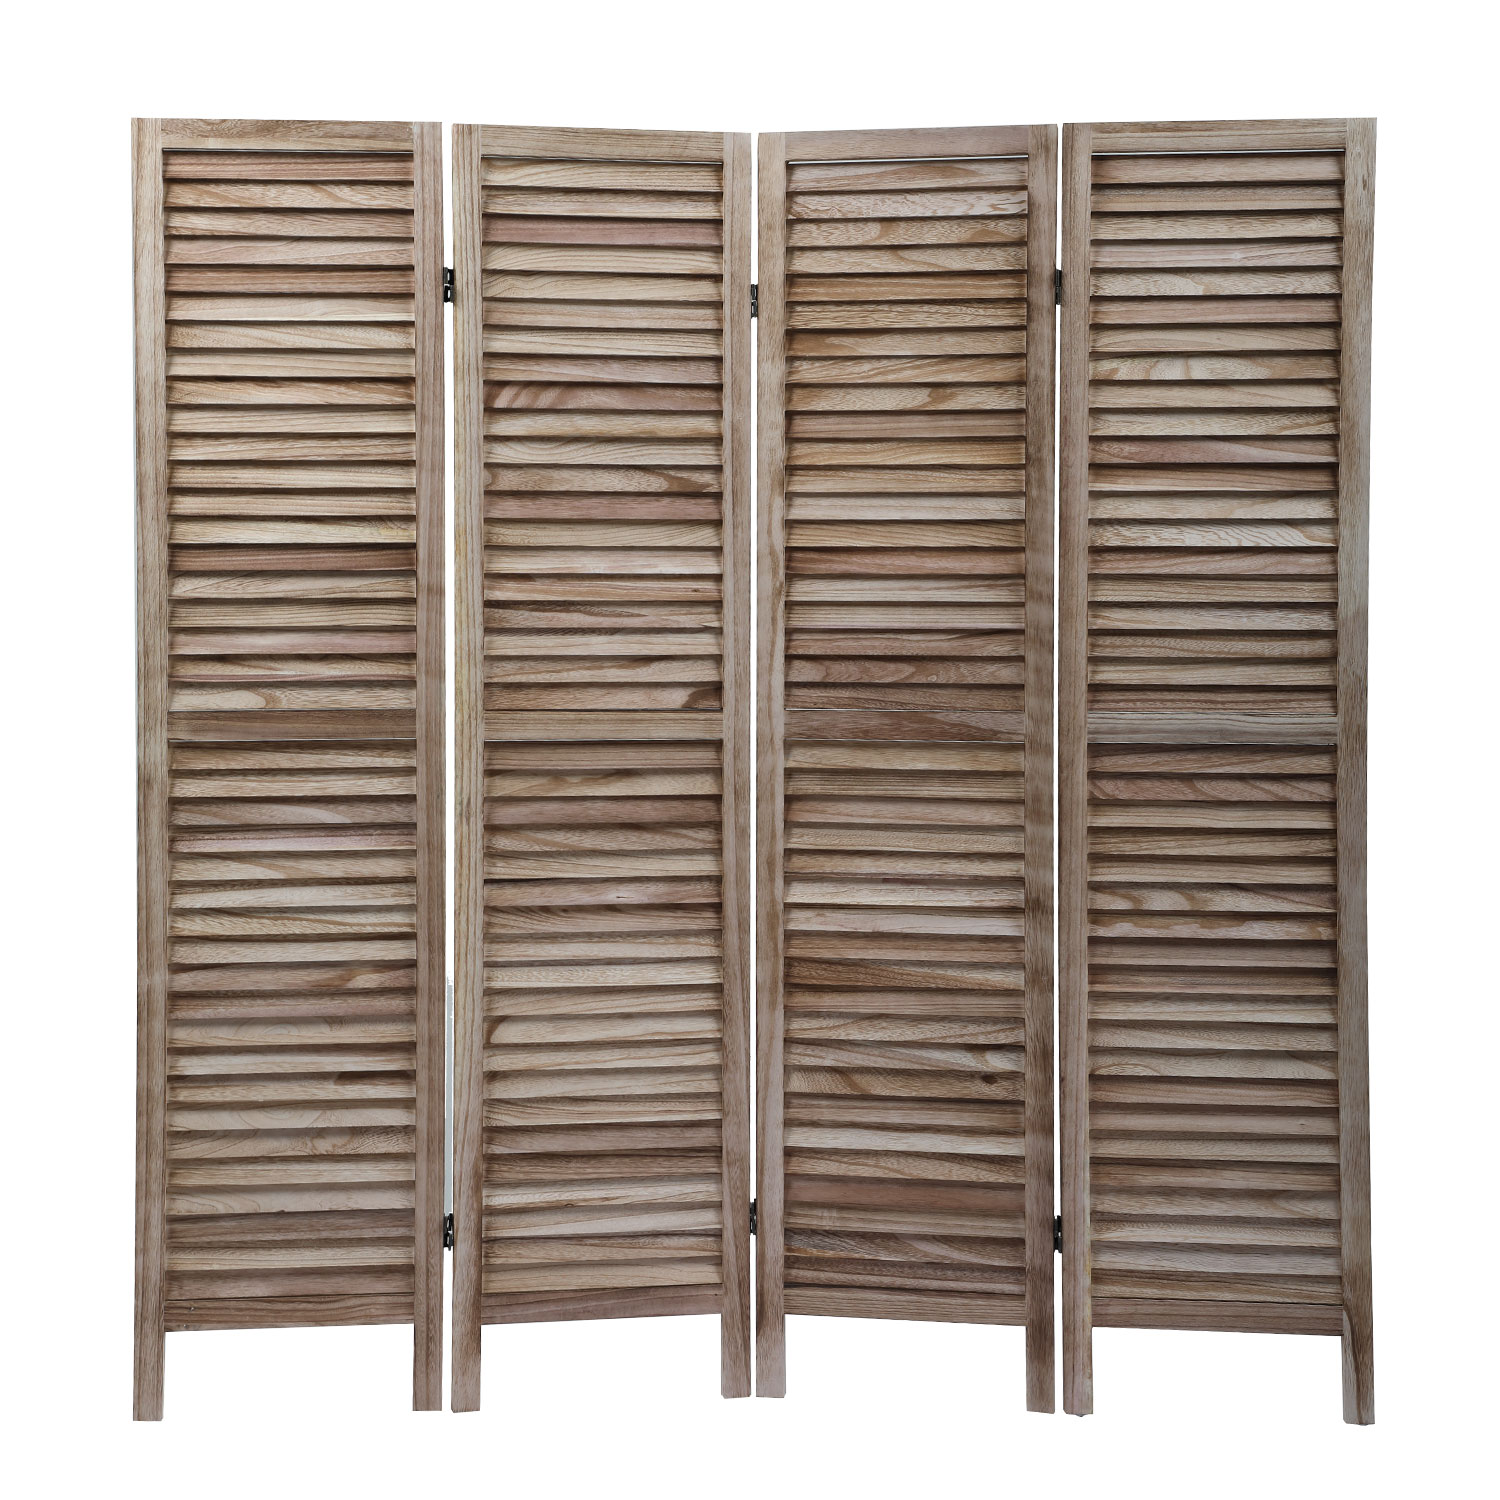 JAXPETY 4 - Panel Sycamore Wood Louver Folding Screen Portable  Room Divider,Folding Privacy Wall Divider Partial Partition